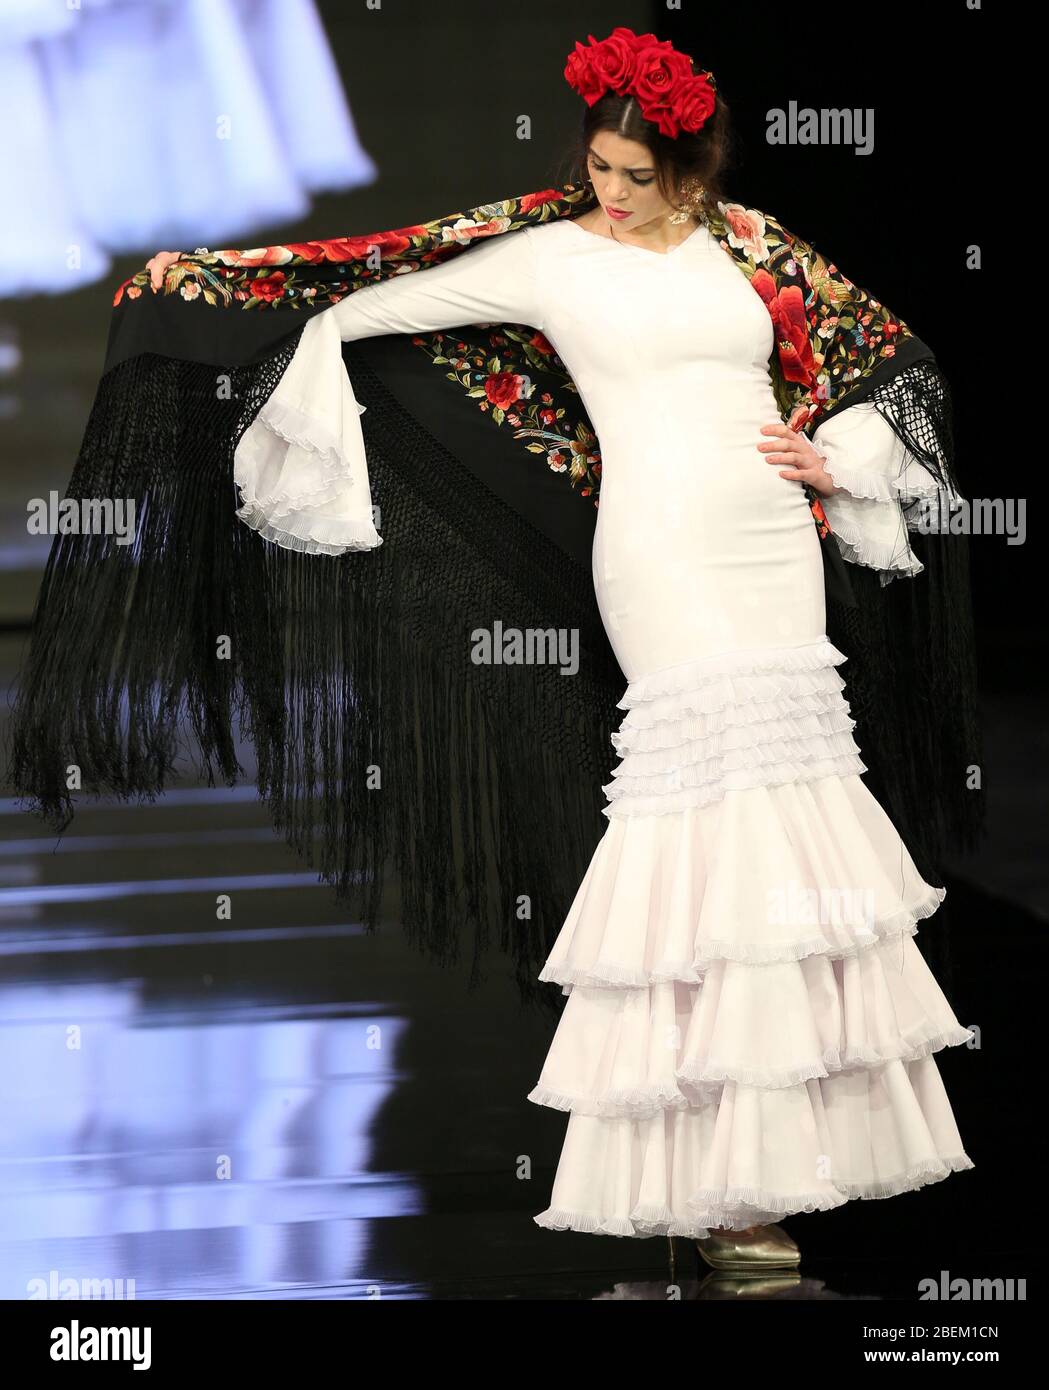 SEVILLA, SPAIN - JAN 30: Model wearing a dress from the Arpegio collection by designer Catarina Santos Rodrigues as part of the SIMOF 2020 (Photo credit: Mickael Chavet) Stock Photo